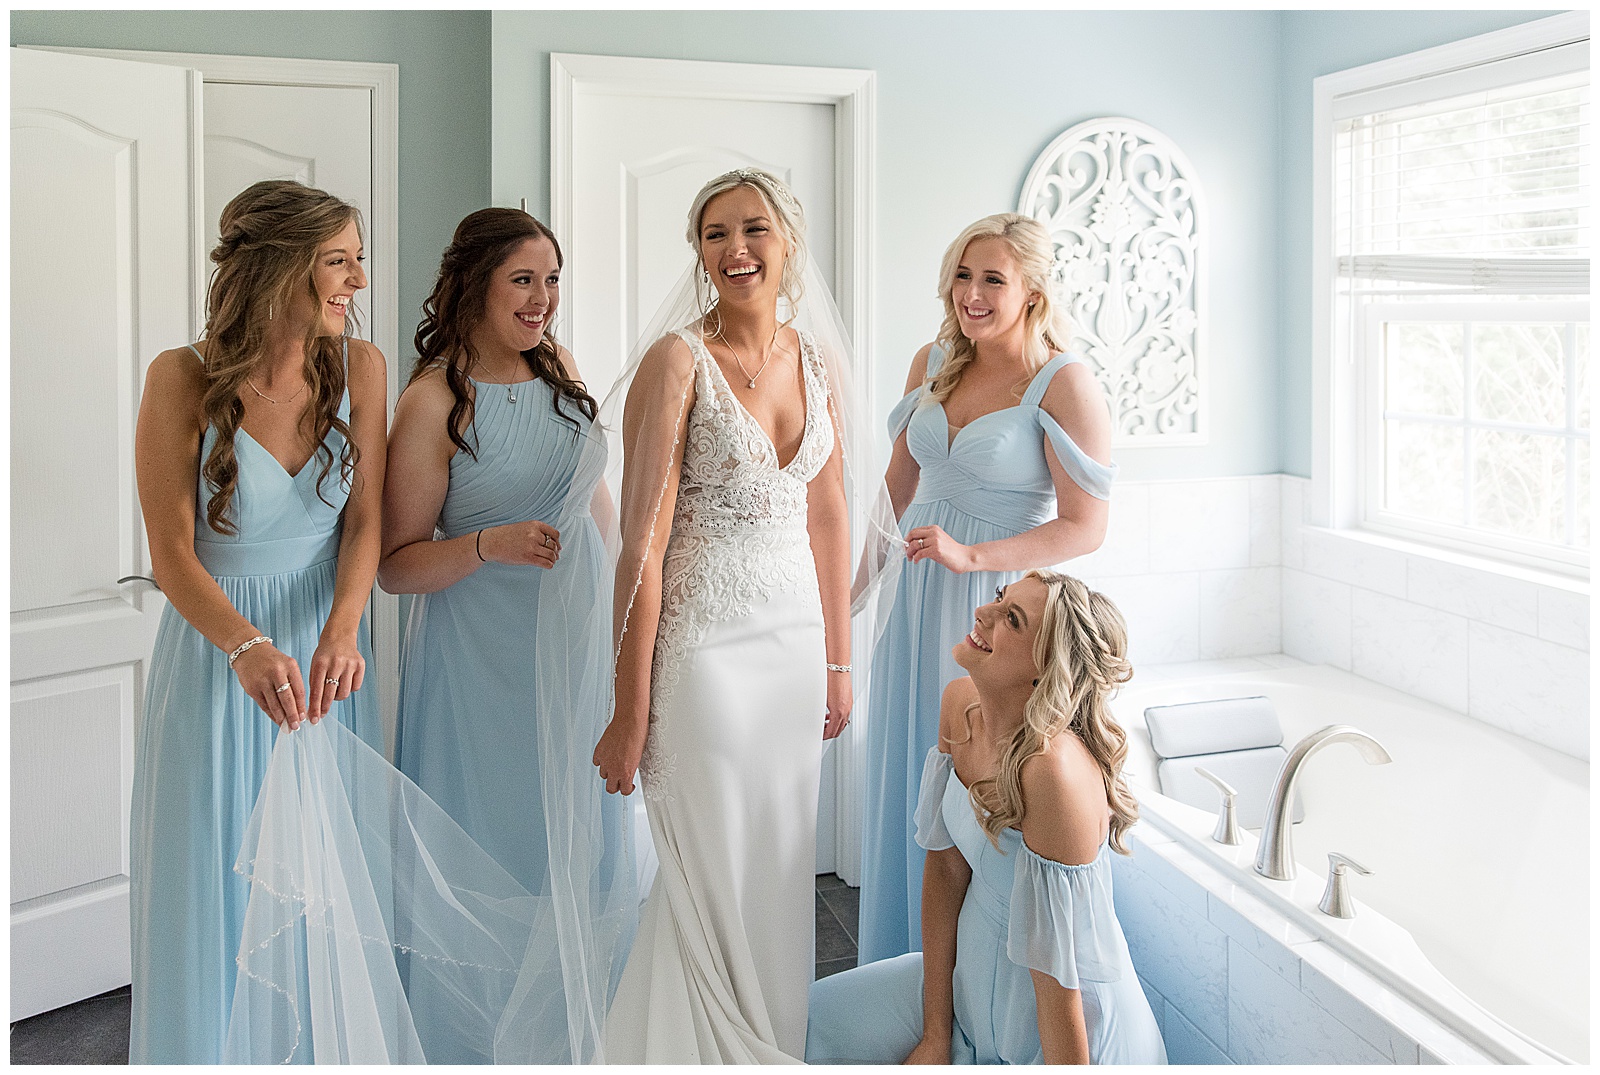 bridal in sleeveless white dress surrounded by bridesmaids in light blue dresses in bridal suite